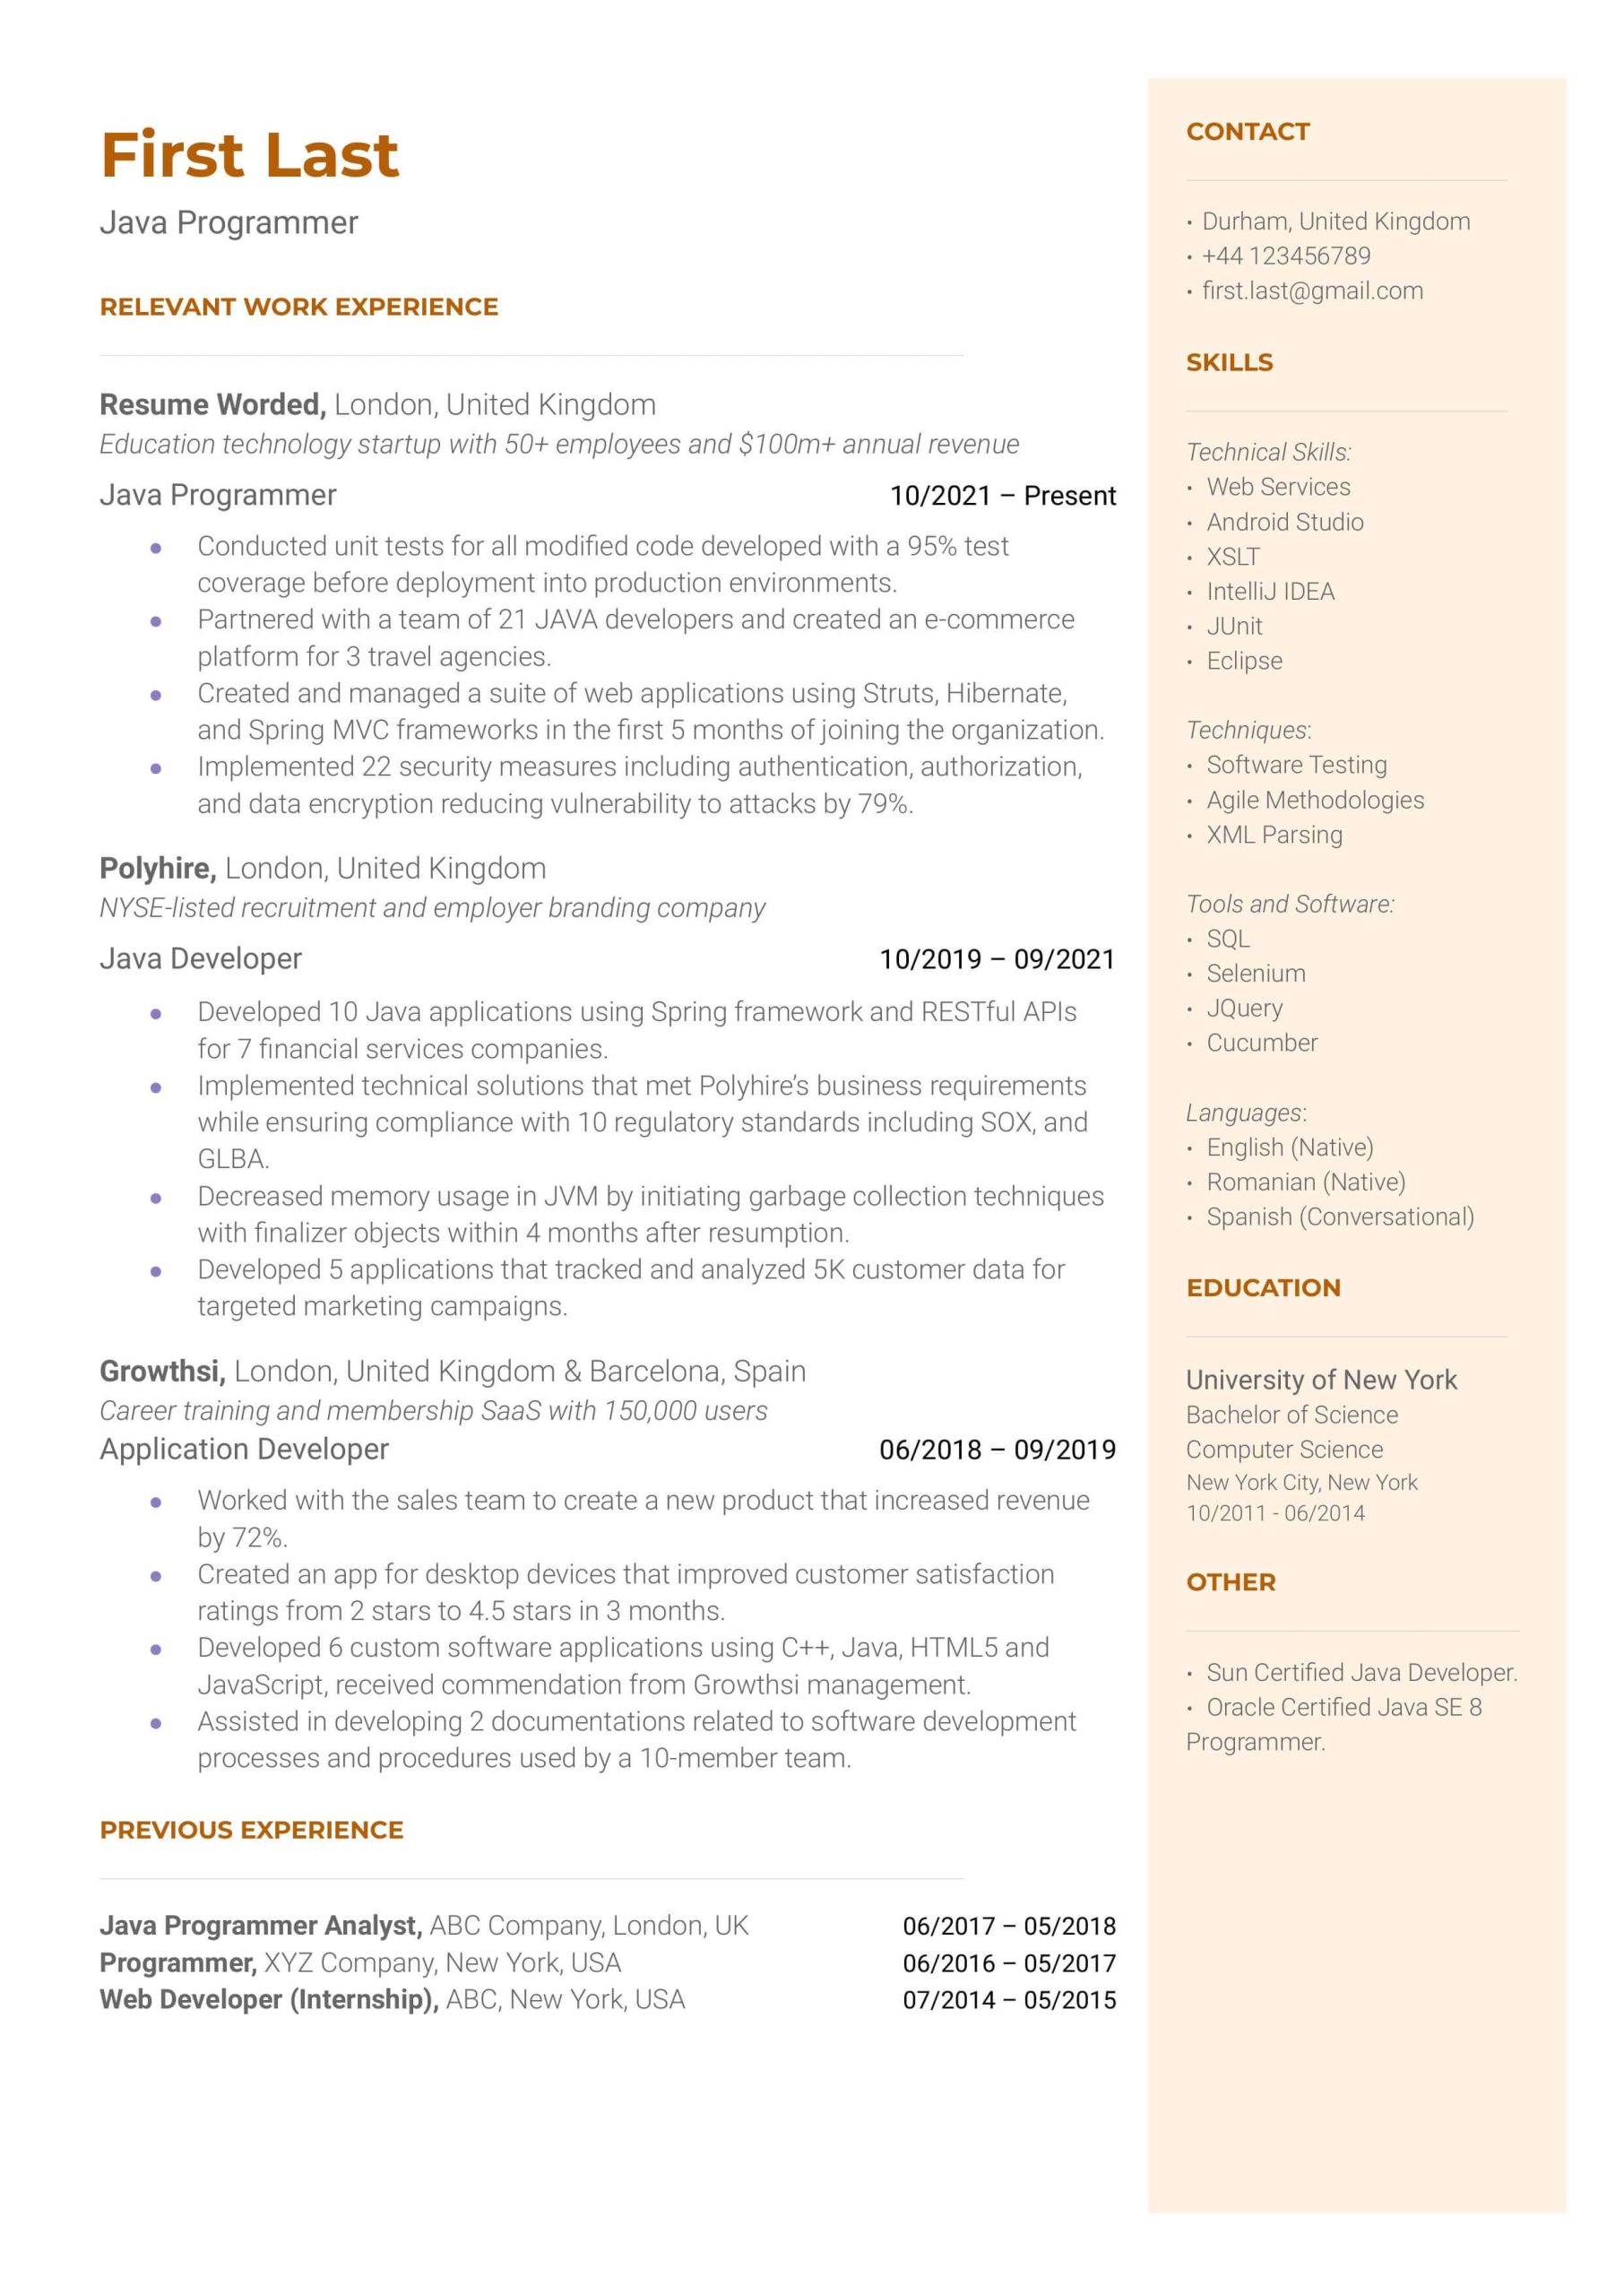 Windows and Doors Bussiness Owner Resume Sample 8 Program Manager Resume Examples for 2022 Resume Worded